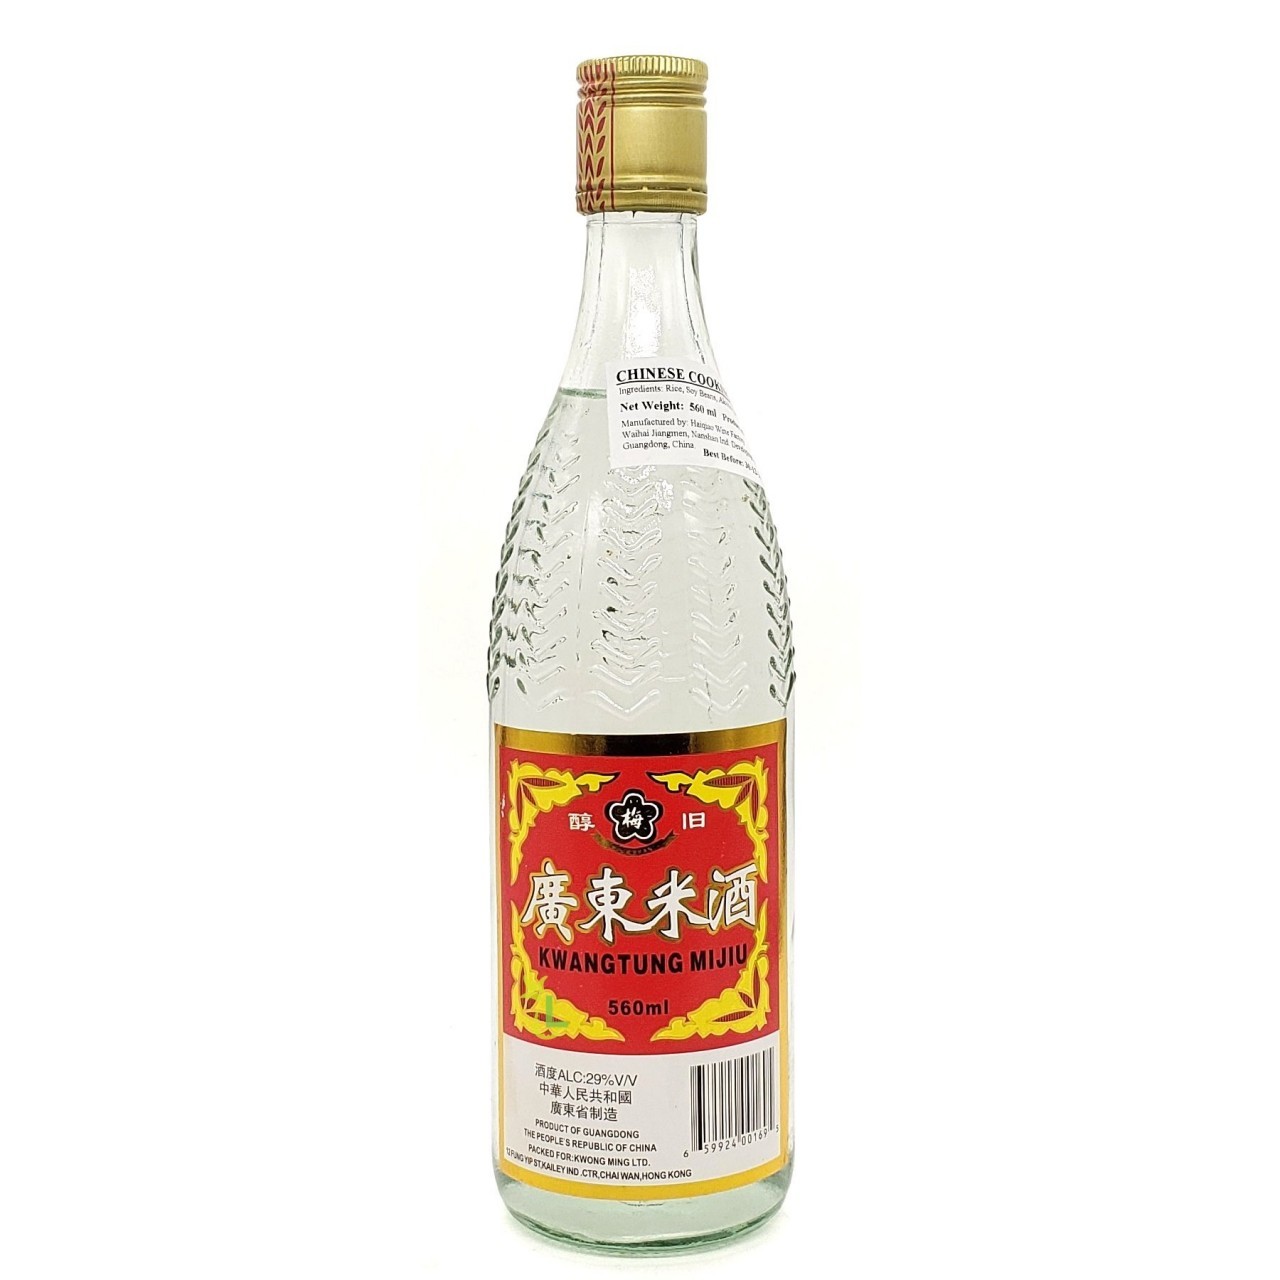 KWANGTUNG COOKING WINE 560ml